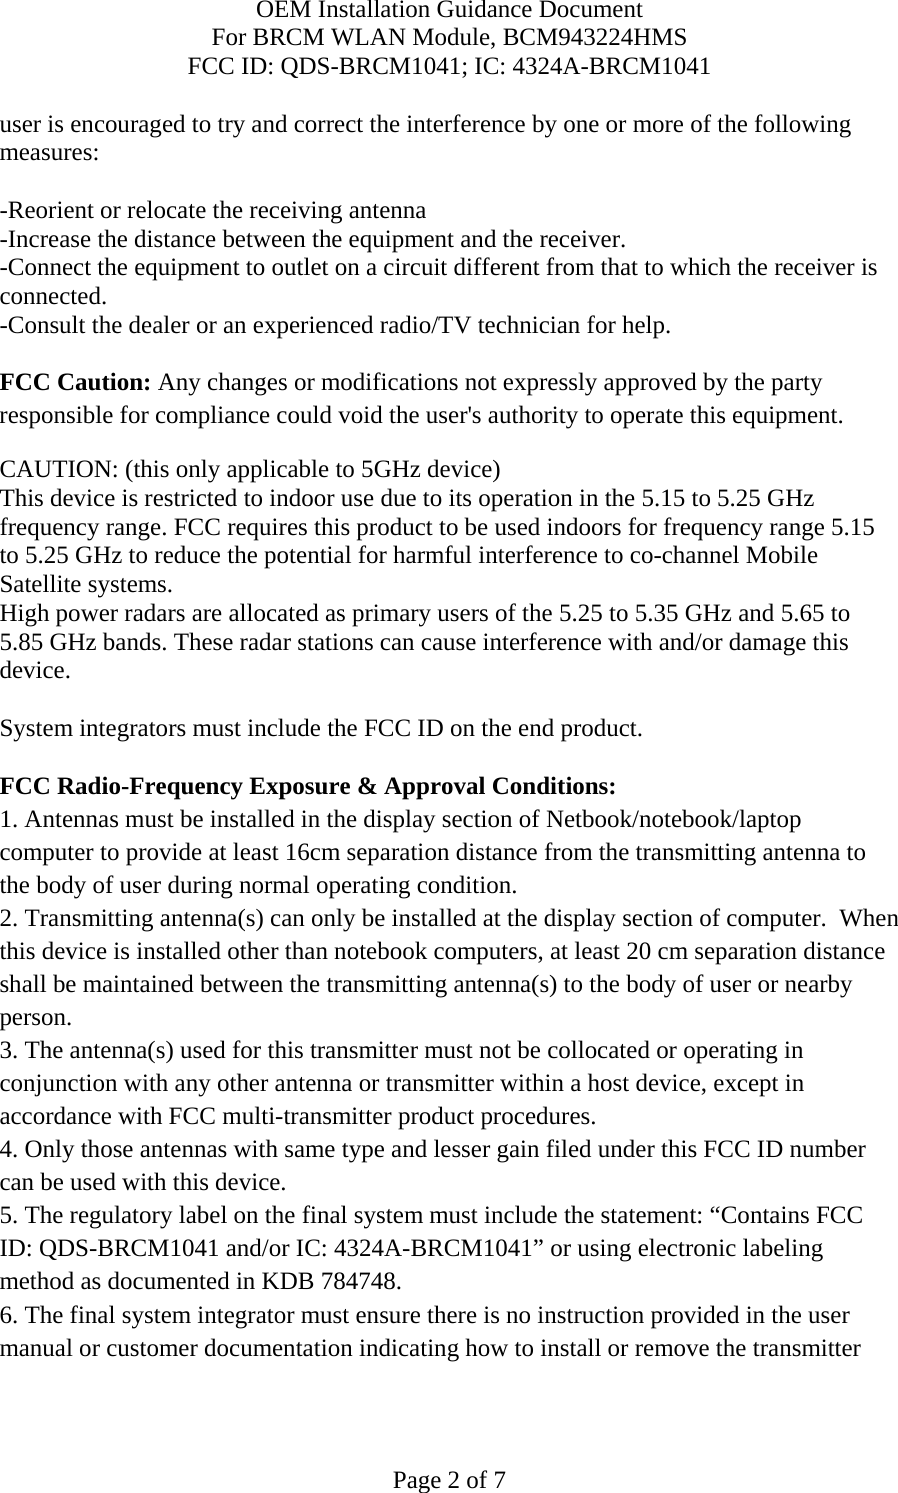 OEM Installation Guidance Document For BRCM WLAN Module, BCM943224HMS FCC ID: QDS-BRCM1041; IC: 4324A-BRCM1041  Page 2 of 7 user is encouraged to try and correct the interference by one or more of the following measures:   -Reorient or relocate the receiving antenna -Increase the distance between the equipment and the receiver. -Connect the equipment to outlet on a circuit different from that to which the receiver is connected. -Consult the dealer or an experienced radio/TV technician for help.  FCC Caution: Any changes or modifications not expressly approved by the party responsible for compliance could void the user&apos;s authority to operate this equipment. CAUTION: (this only applicable to 5GHz device) This device is restricted to indoor use due to its operation in the 5.15 to 5.25 GHz frequency range. FCC requires this product to be used indoors for frequency range 5.15 to 5.25 GHz to reduce the potential for harmful interference to co-channel Mobile Satellite systems. High power radars are allocated as primary users of the 5.25 to 5.35 GHz and 5.65 to 5.85 GHz bands. These radar stations can cause interference with and/or damage this device.  System integrators must include the FCC ID on the end product.   FCC Radio-Frequency Exposure &amp; Approval Conditions: 1. Antennas must be installed in the display section of Netbook/notebook/laptop computer to provide at least 16cm separation distance from the transmitting antenna to the body of user during normal operating condition. 2. Transmitting antenna(s) can only be installed at the display section of computer.  When this device is installed other than notebook computers, at least 20 cm separation distance shall be maintained between the transmitting antenna(s) to the body of user or nearby person. 3. The antenna(s) used for this transmitter must not be collocated or operating in conjunction with any other antenna or transmitter within a host device, except in accordance with FCC multi-transmitter product procedures. 4. Only those antennas with same type and lesser gain filed under this FCC ID number can be used with this device. 5. The regulatory label on the final system must include the statement: “Contains FCC ID: QDS-BRCM1041 and/or IC: 4324A-BRCM1041” or using electronic labeling method as documented in KDB 784748. 6. The final system integrator must ensure there is no instruction provided in the user manual or customer documentation indicating how to install or remove the transmitter 